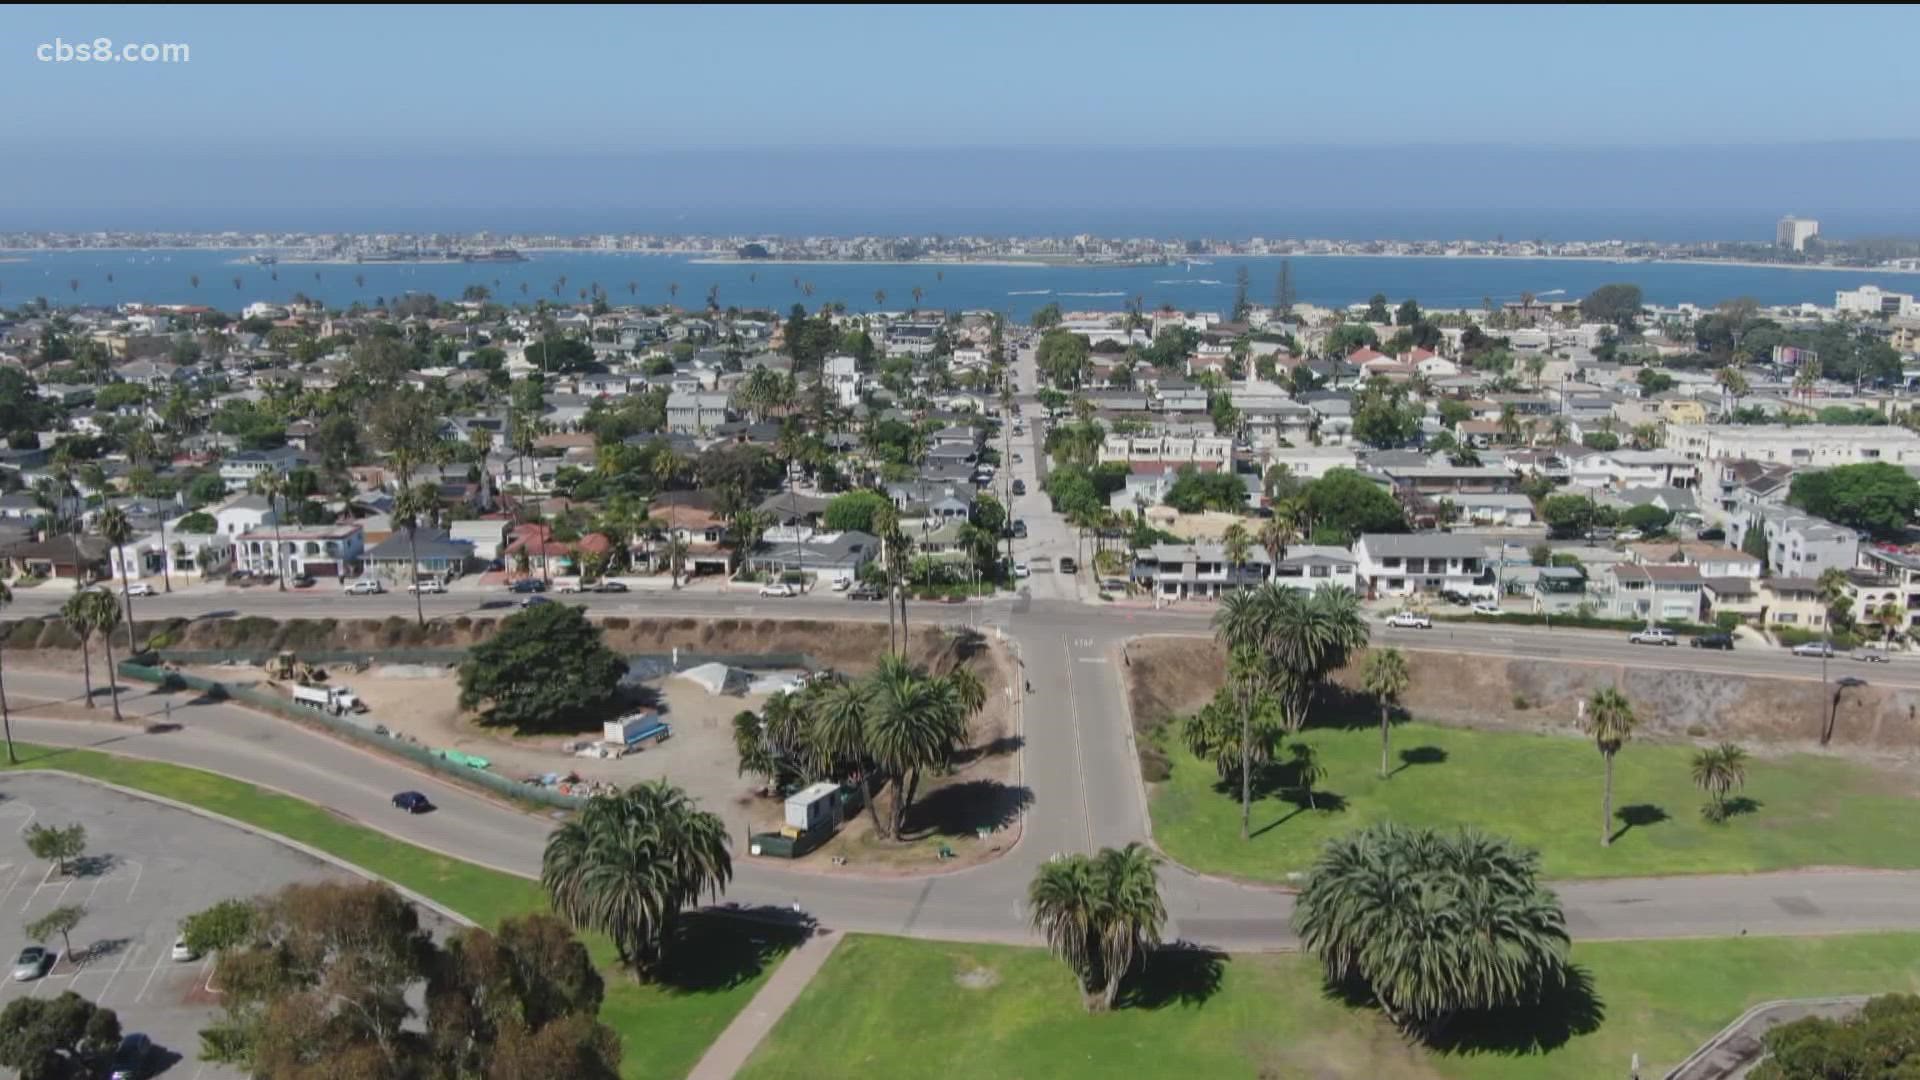 As San Diegans continue to feel the strains of expensive housing, a new study confirms that rent prices across the county have dramatically increased.